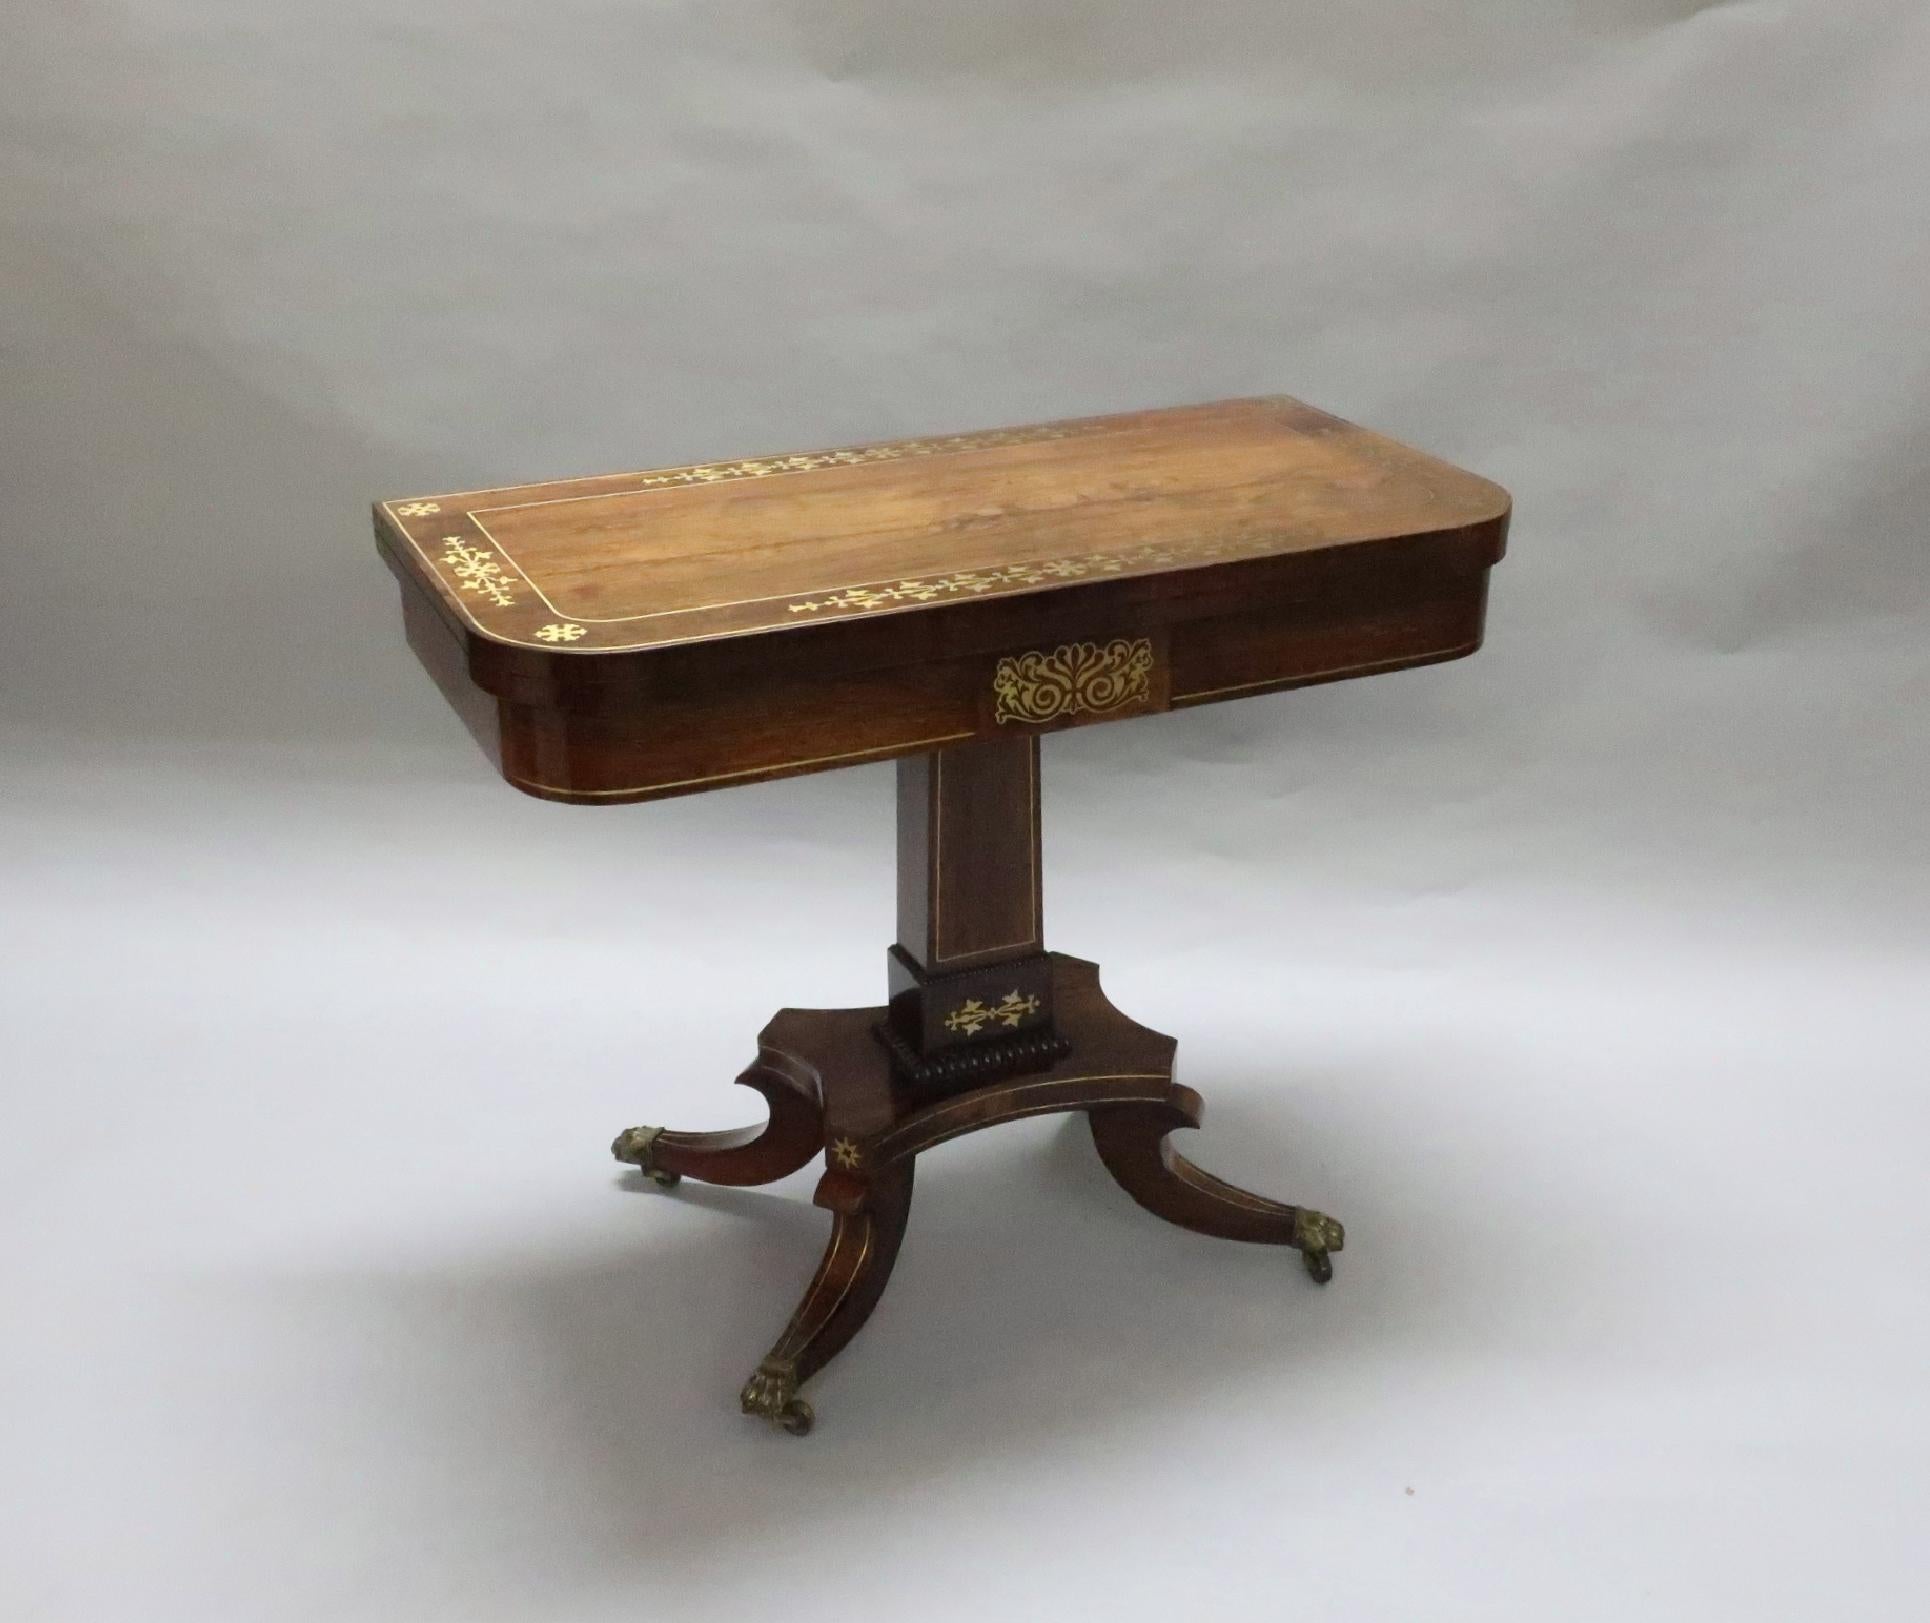 A very fine quality Regency rosewood and brass inlaid fold over games or occasional table with rectangular shaped stepped column and quarter beaded mouldings. The table has a shaped platform base and out swept tapering legs with brass string inlay